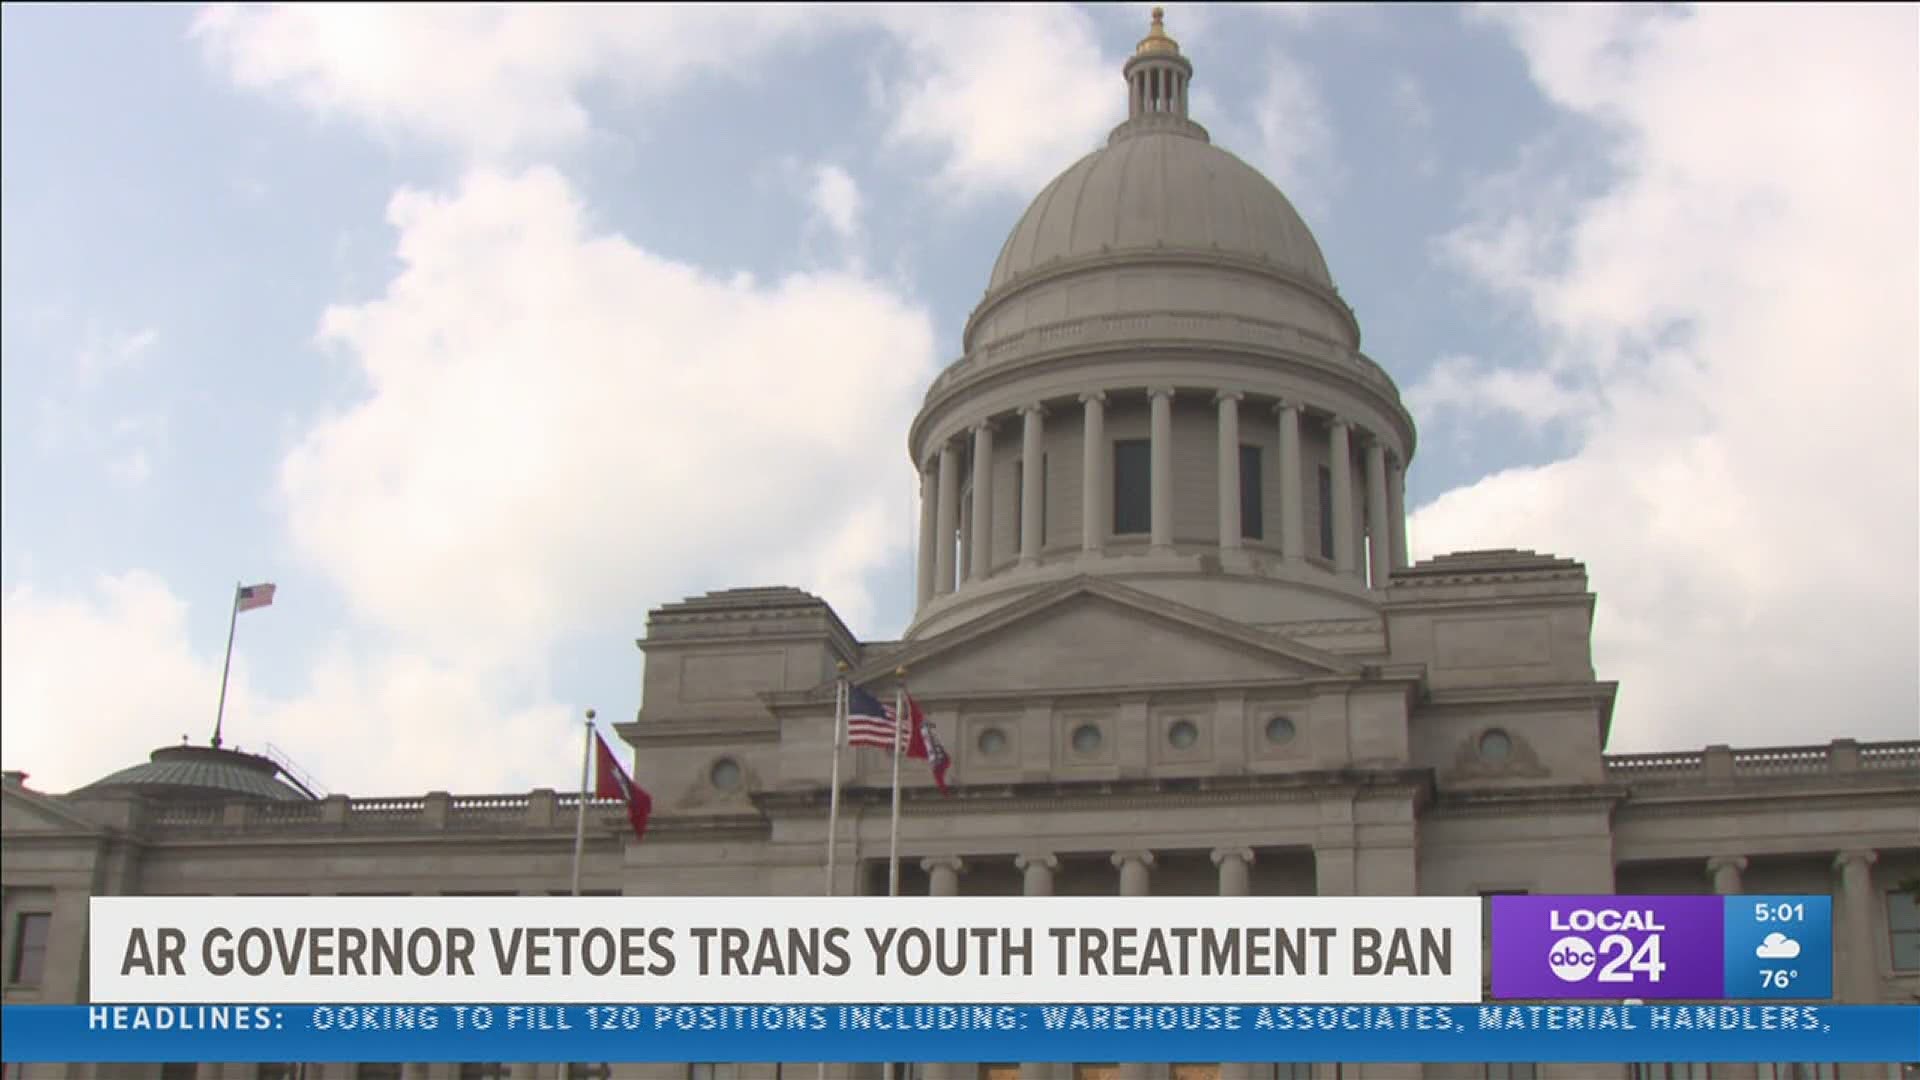 Arkansas' governor has vetoed legislation that would have made his state the first to ban gender confirming treatments for transgender youth.